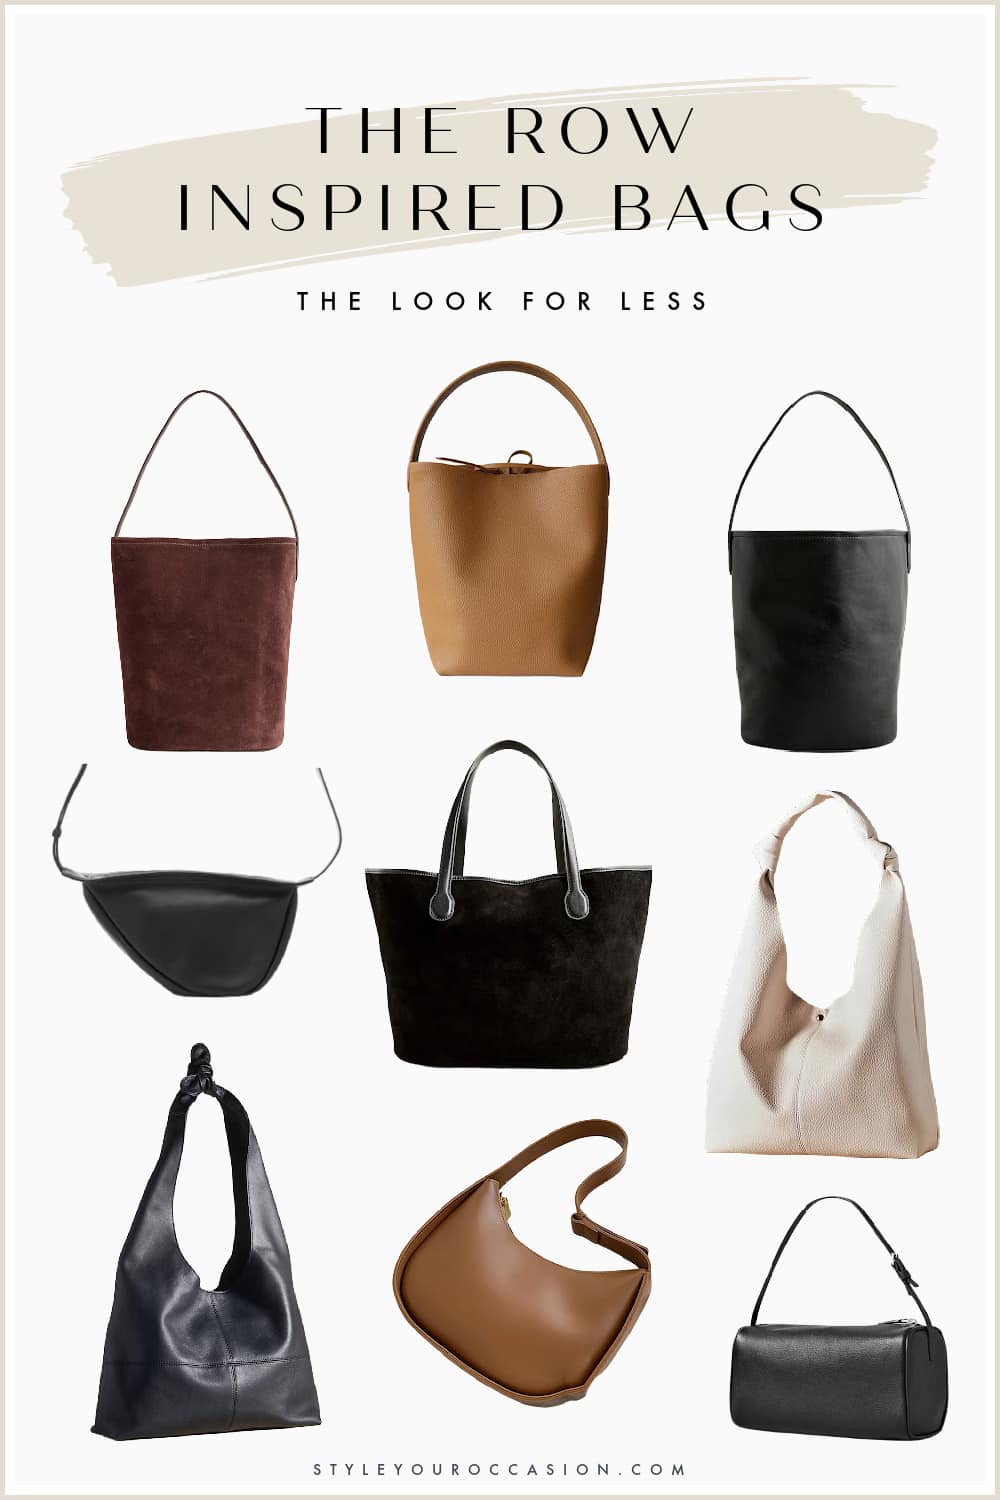 An image board of The Row bag dupes including the 90s bag, the tote bag, and the banana bag